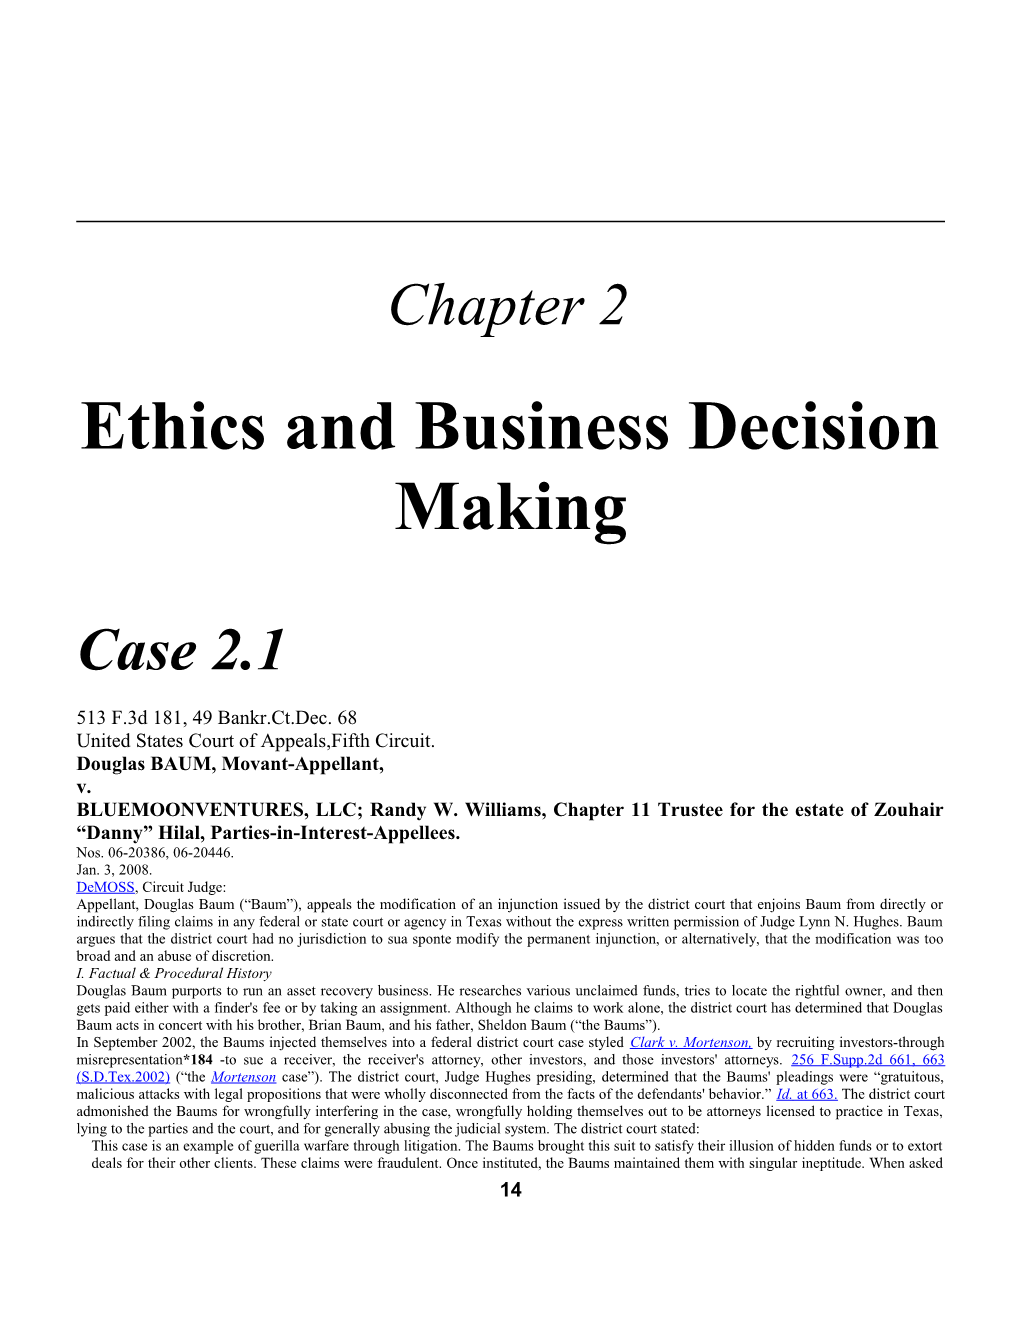 Chapter 2: Ethics and Business Decision Making 1